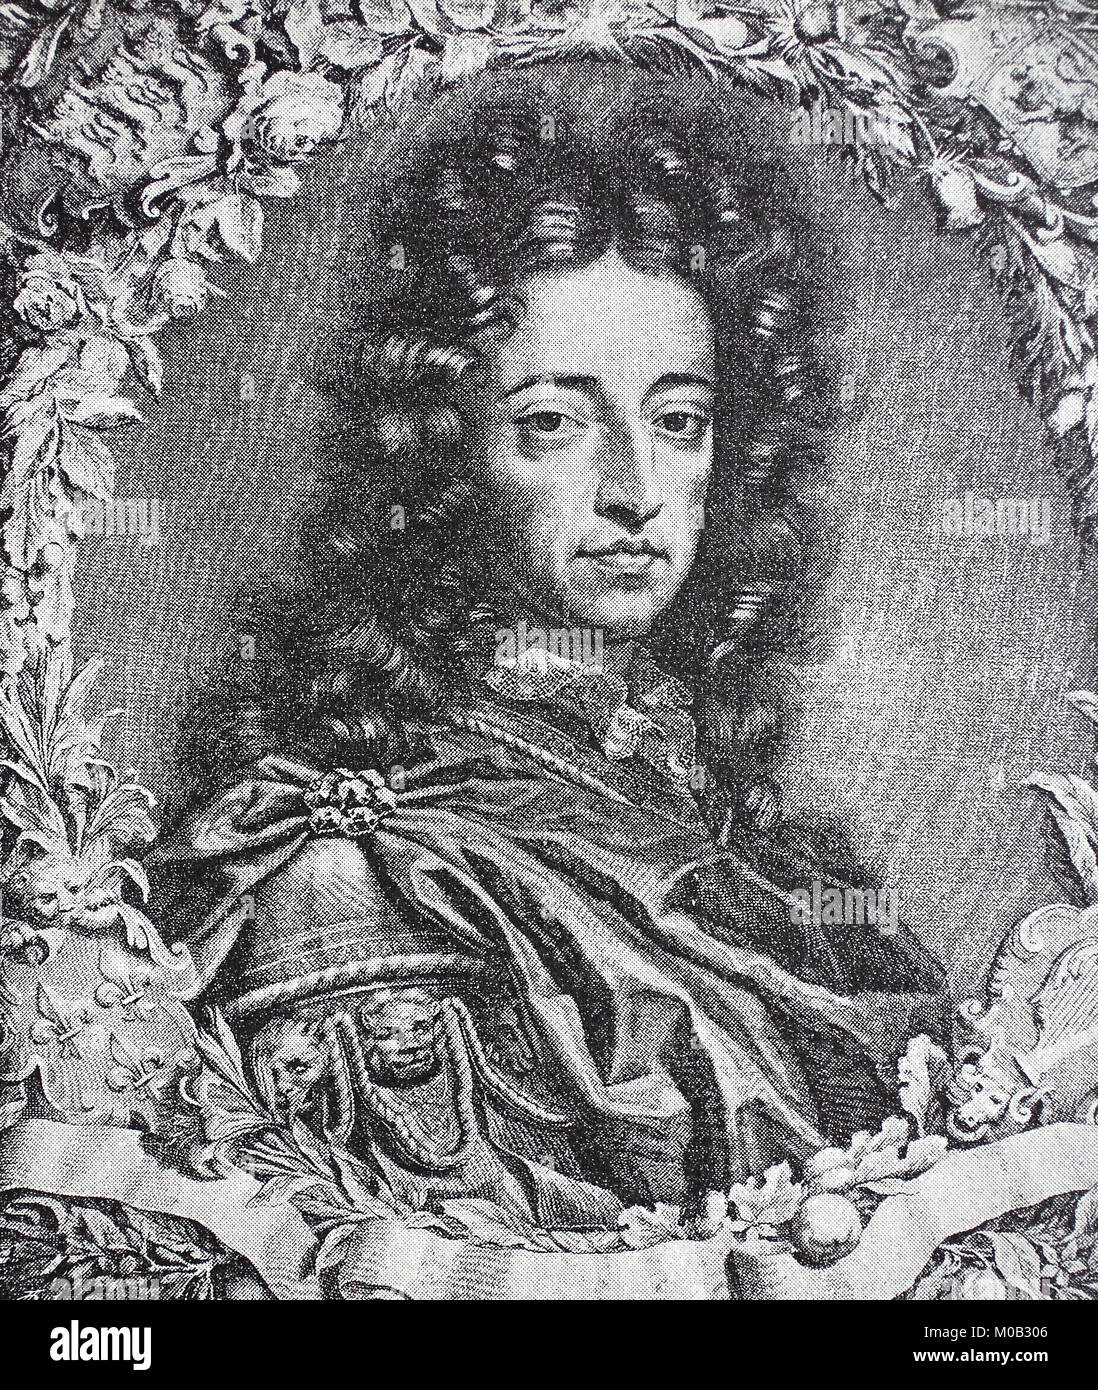 Wilhelm III. from Oranien-Nassau, November 14, 1650 -19. March 1702, was from 1672 governor of the Netherlands and from 1689 in his own right, together with Mary II and also after her death in personal union king of England, Scotland and Ireland, digital improved reproduction of an original print from 1880 Stock Photo